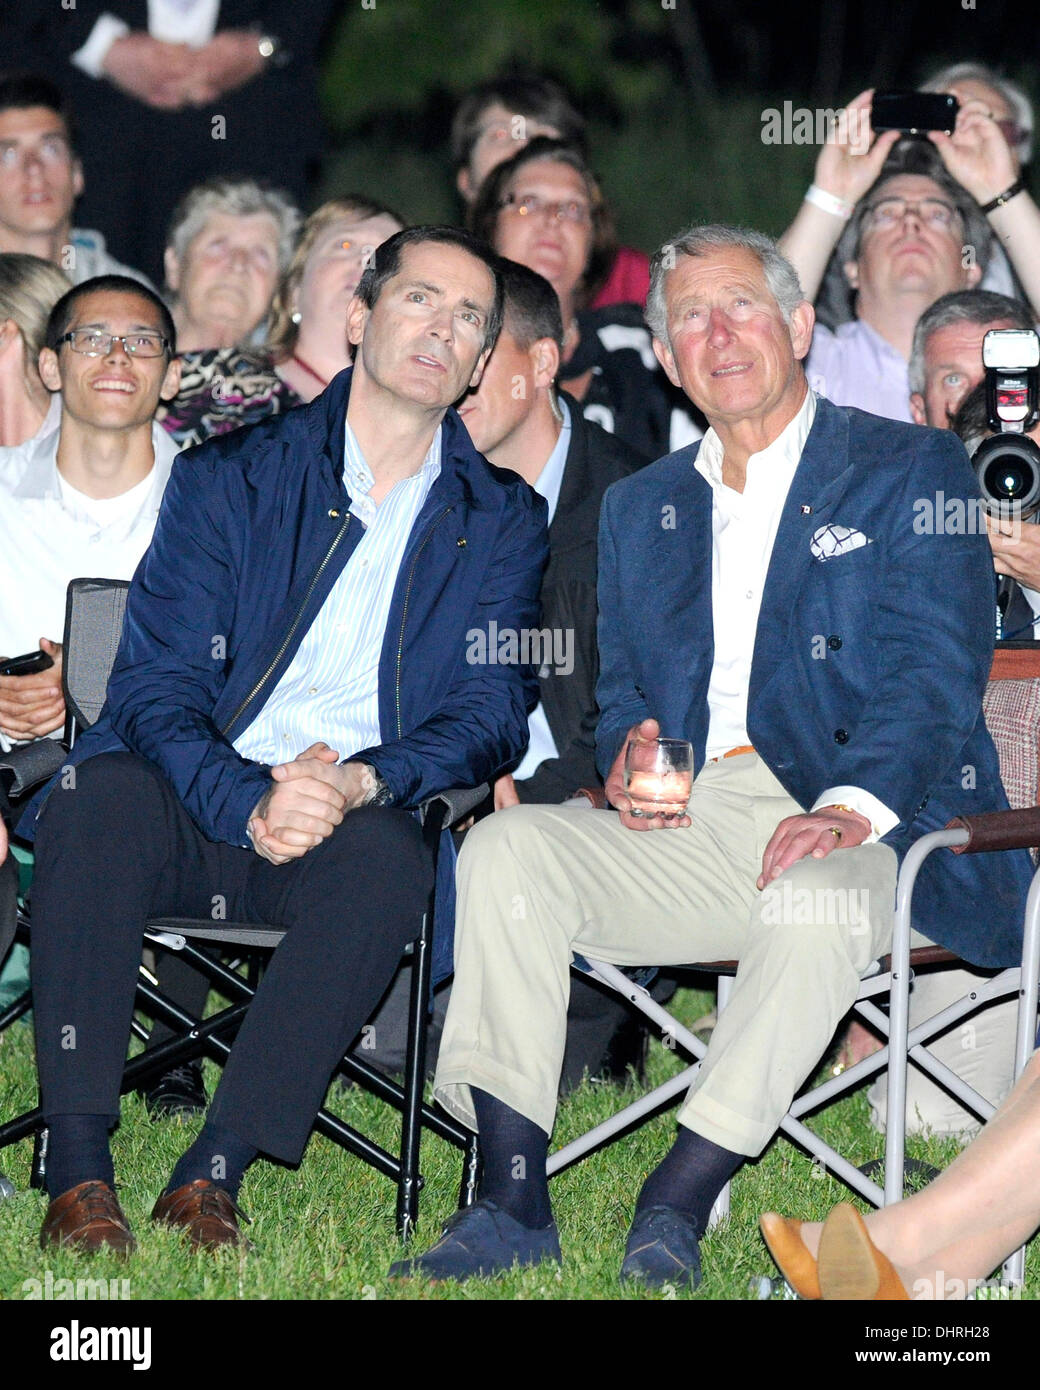 Dalton McGuinty, Premier of Ontario, and Prince Charles, The Prince of Wales    attend the Victoria Day Firework display at Ashbridges Bay hosted by the Government of Ontario during the 2012 Royal Tour of Ontario, celebrating Her Majesty's Diamond Jubilee.   Toronto, Canada - 21.05.12 Stock Photo